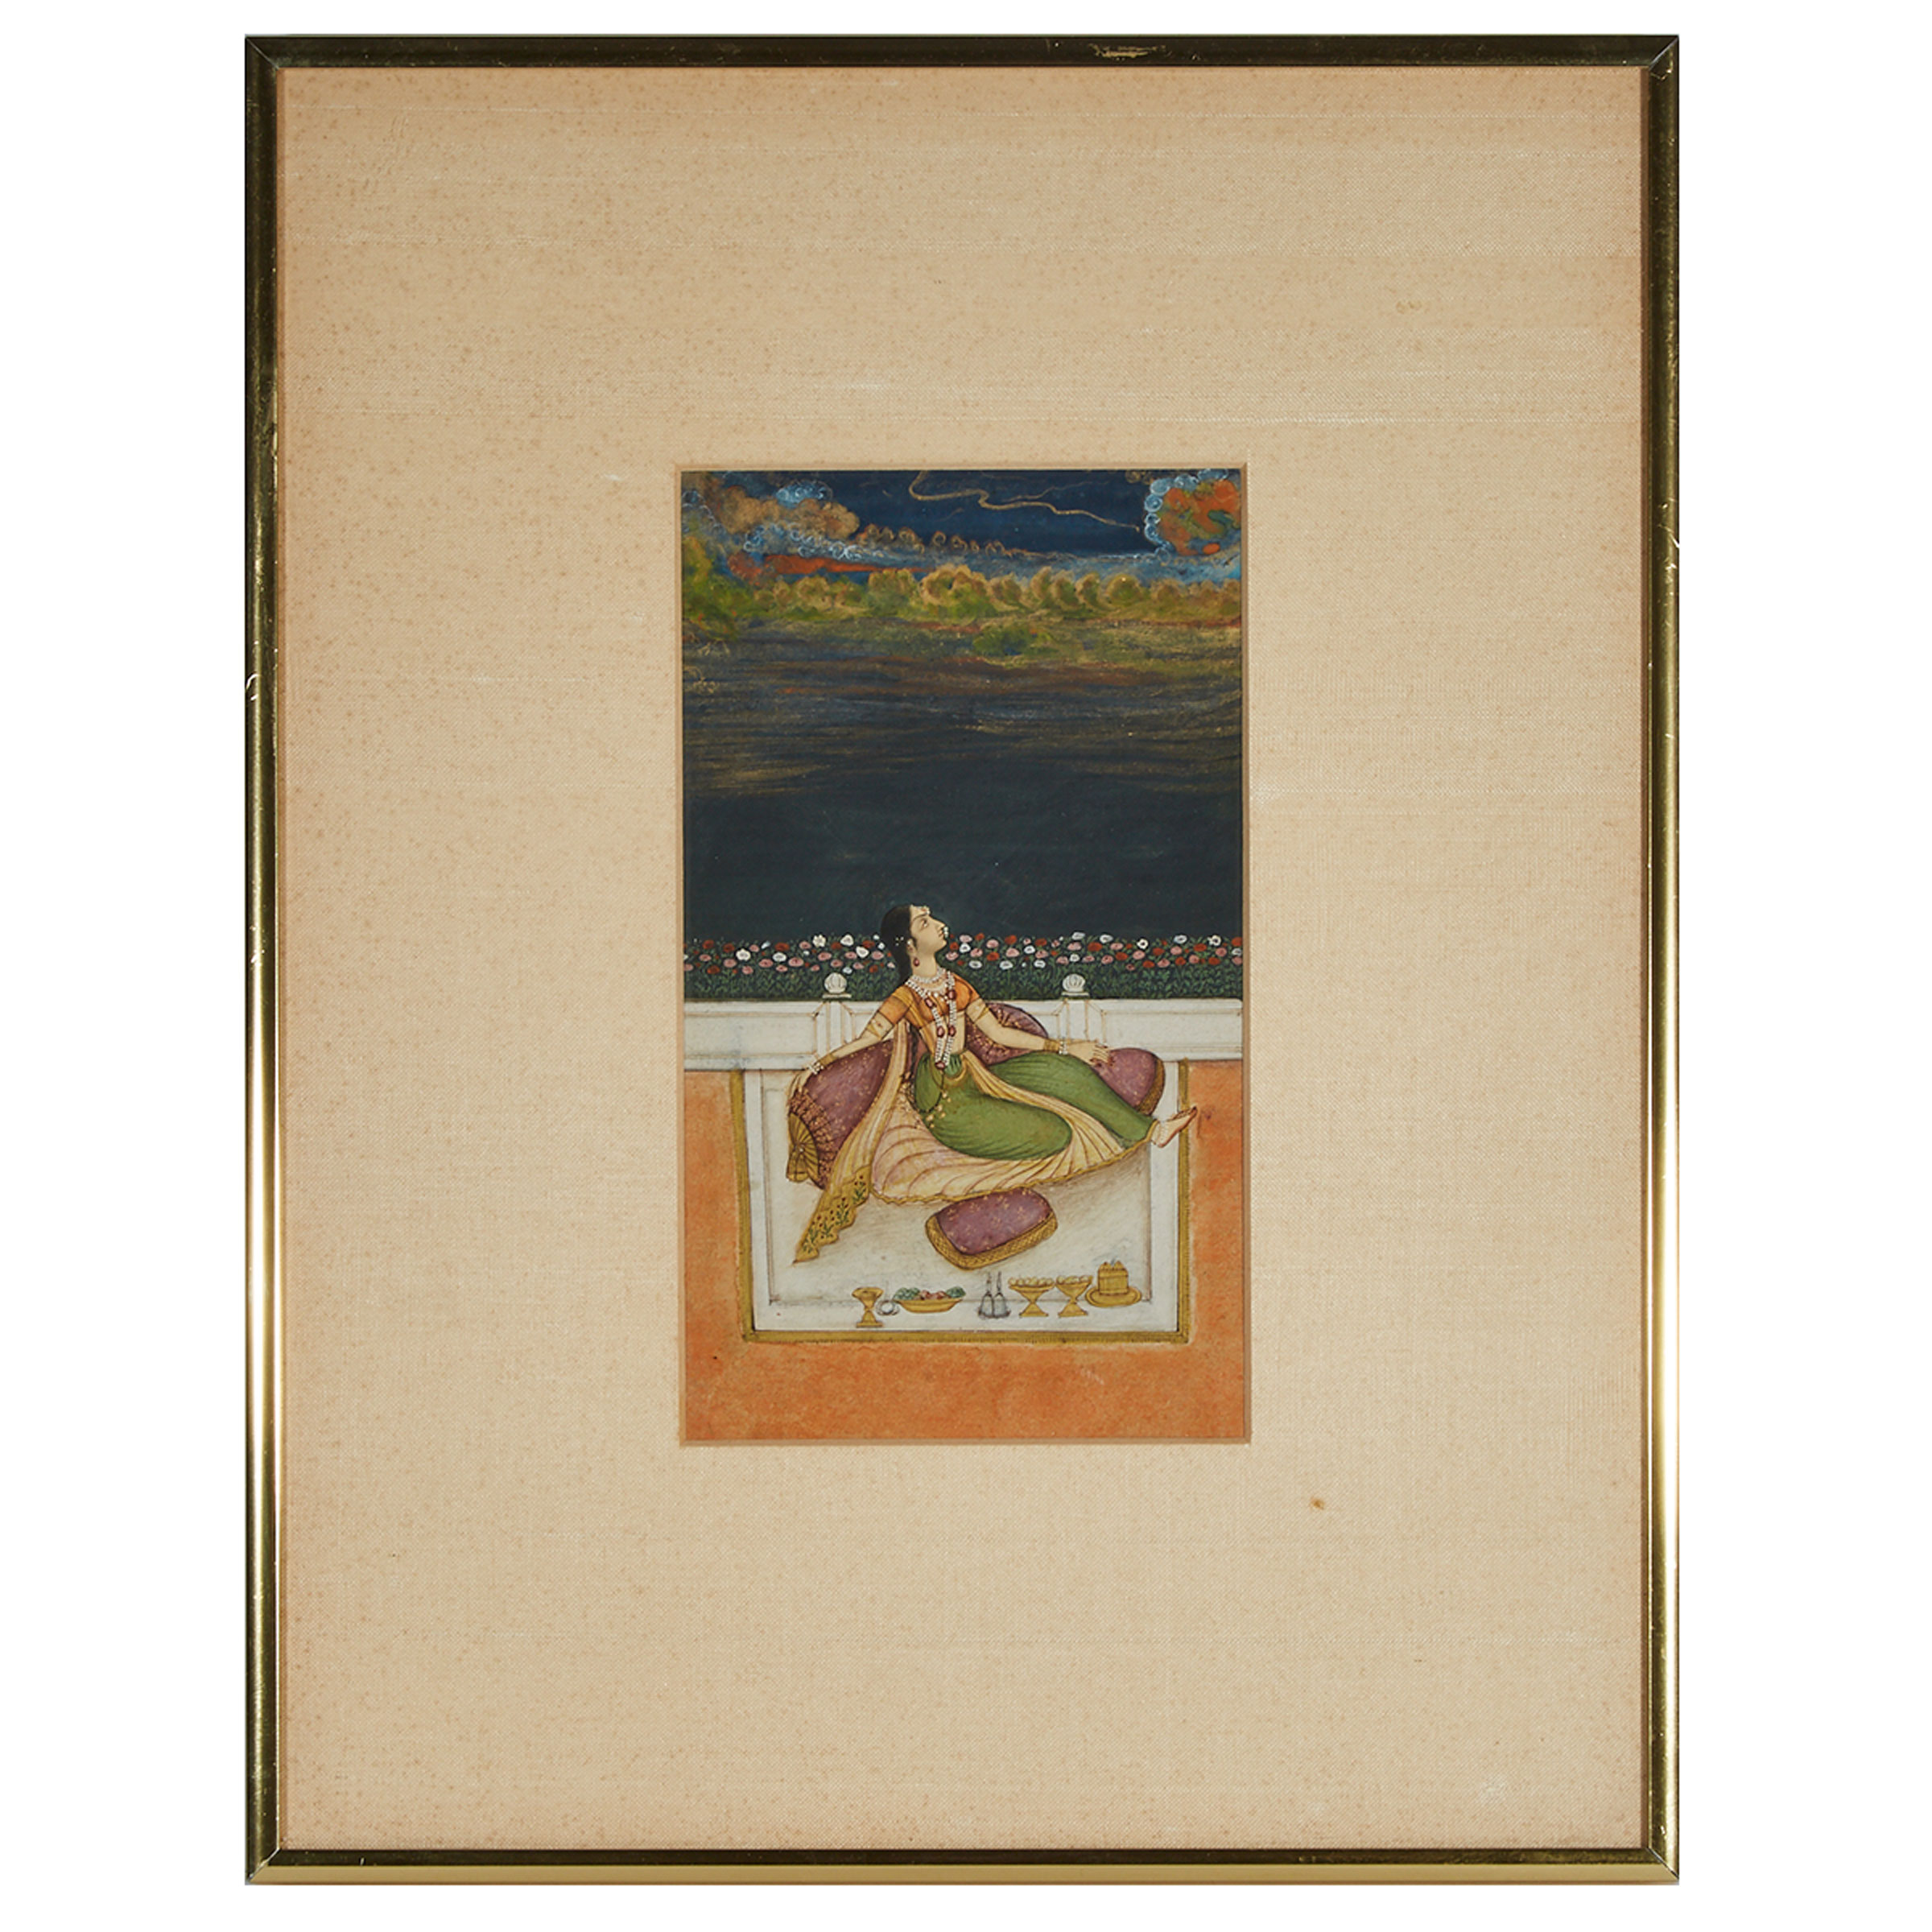 A Miniature Painting of a Princess, Mughal School, 19th Century